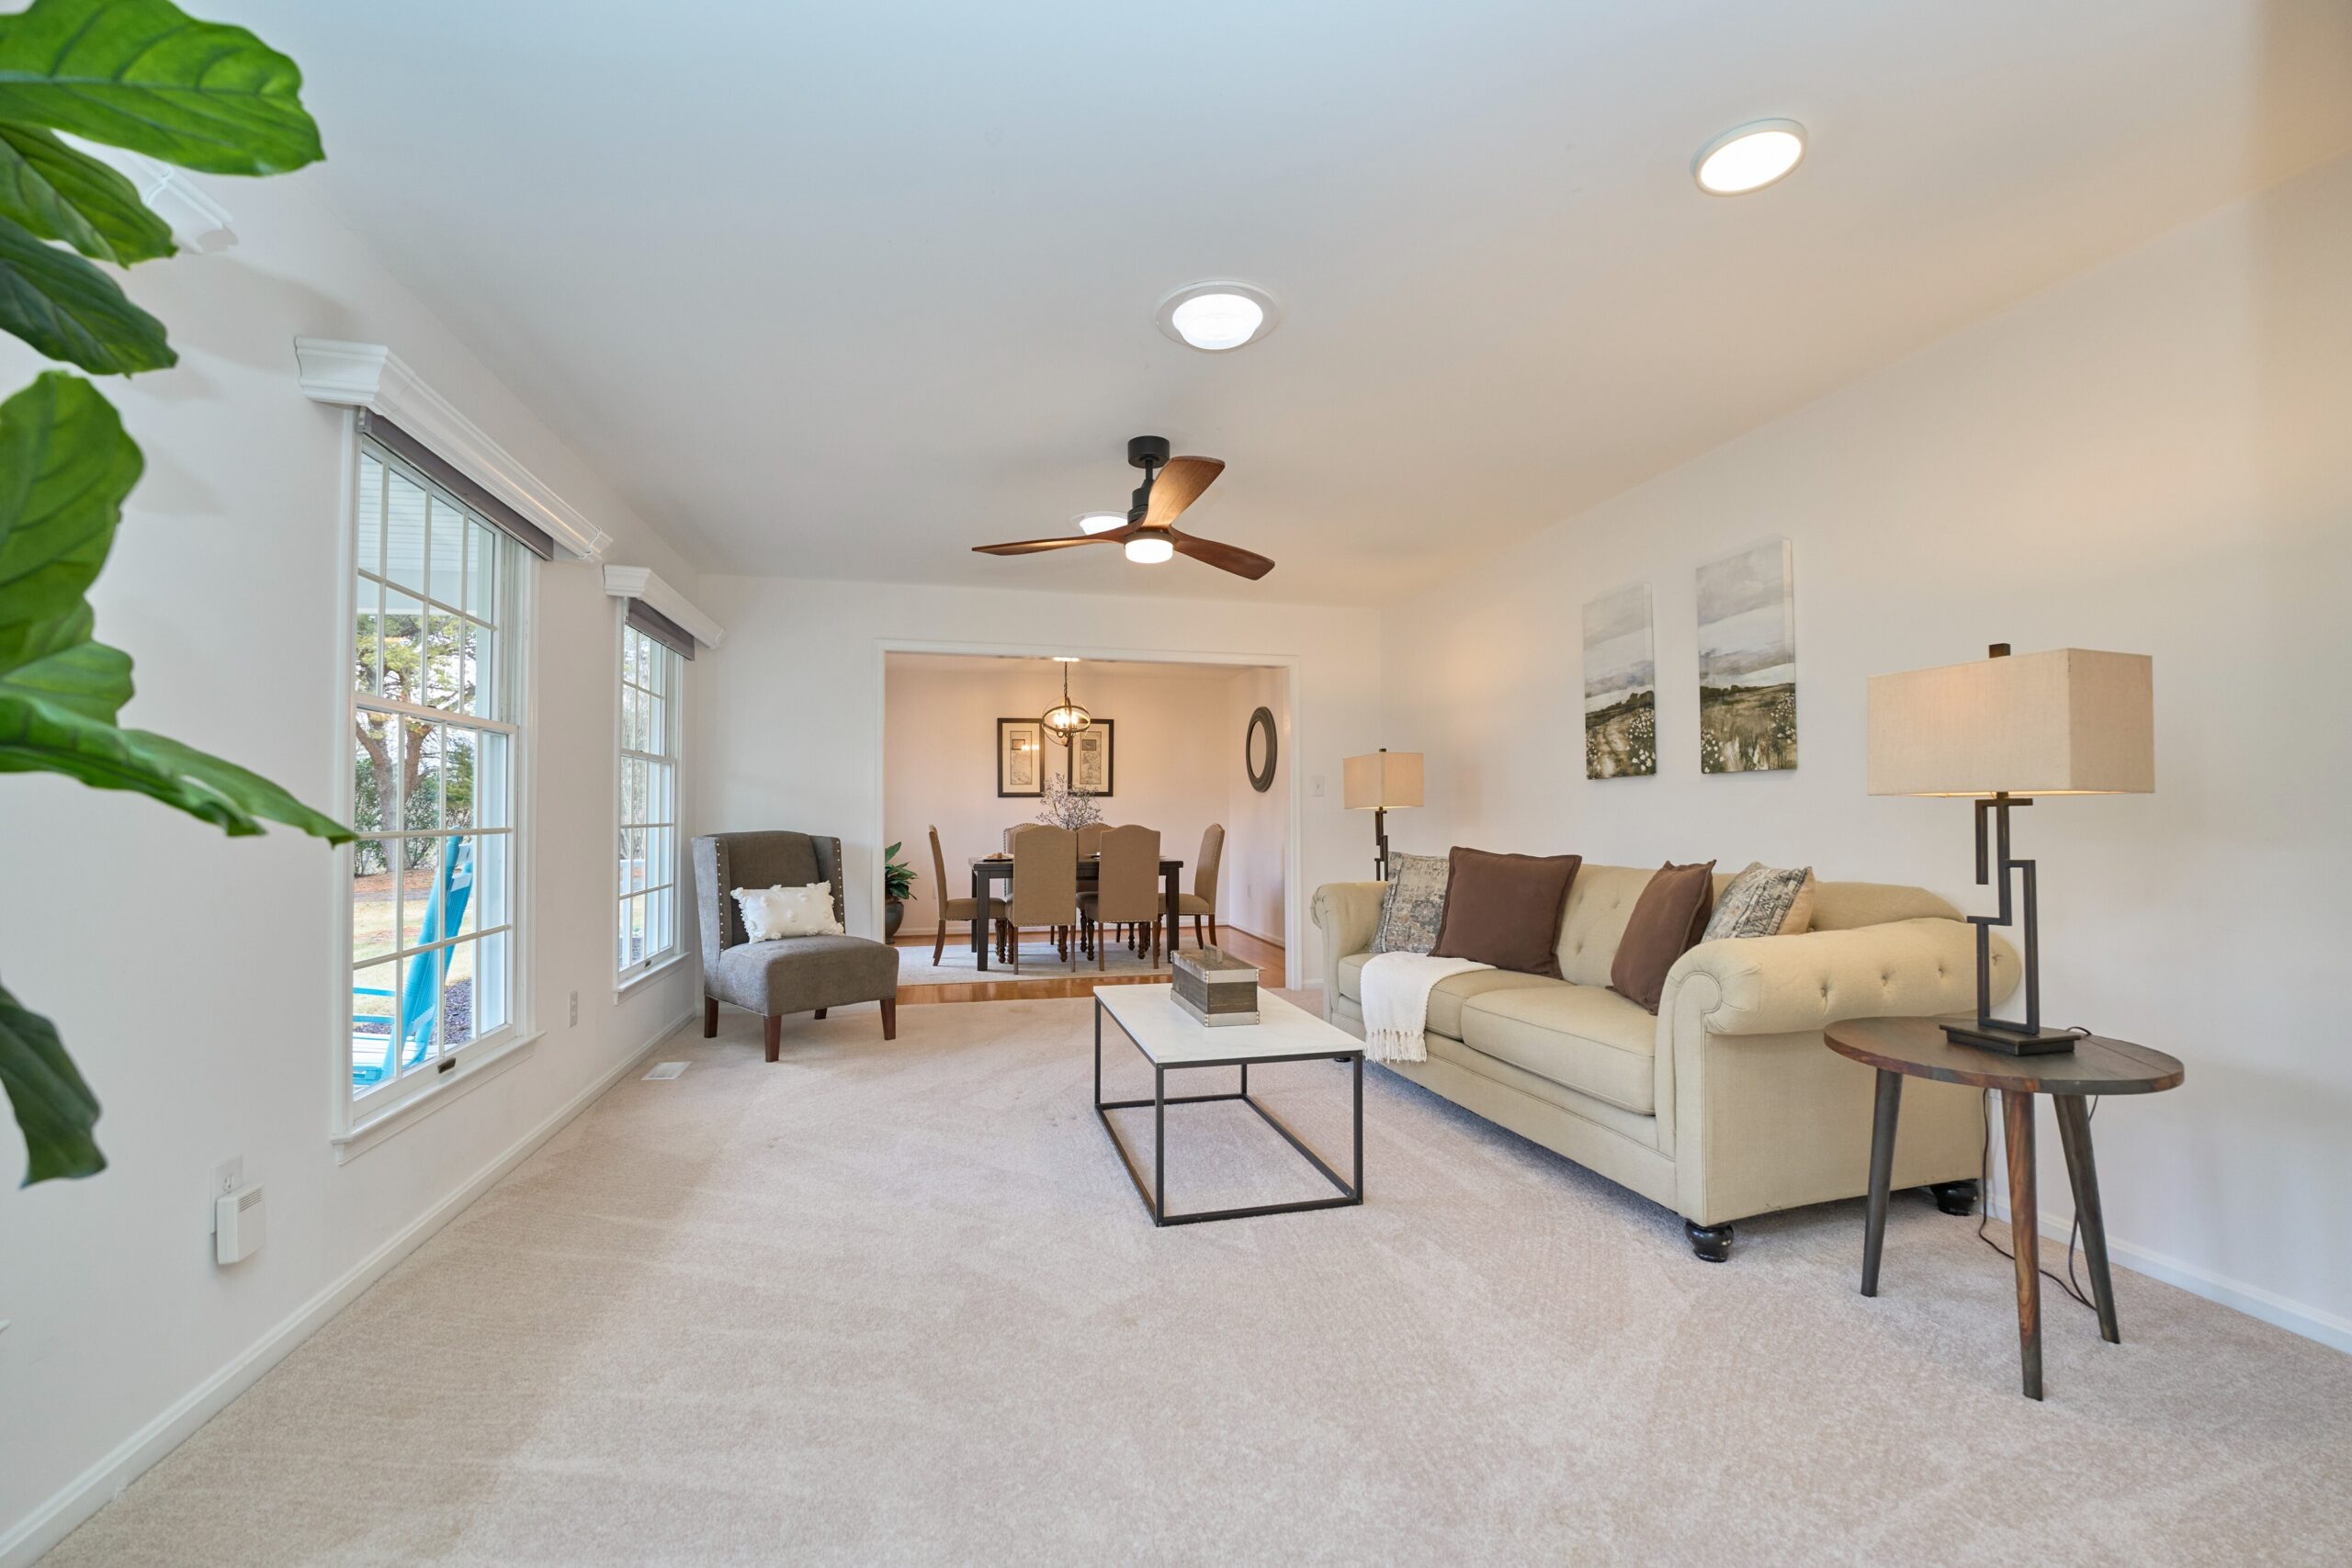 Professional interior photo of 3103 Indian Run Rd - showing the front sitting room with cool ceiling fan, freshly painted white walls, and plush carpets with large windows and natural light as well as solar tubes